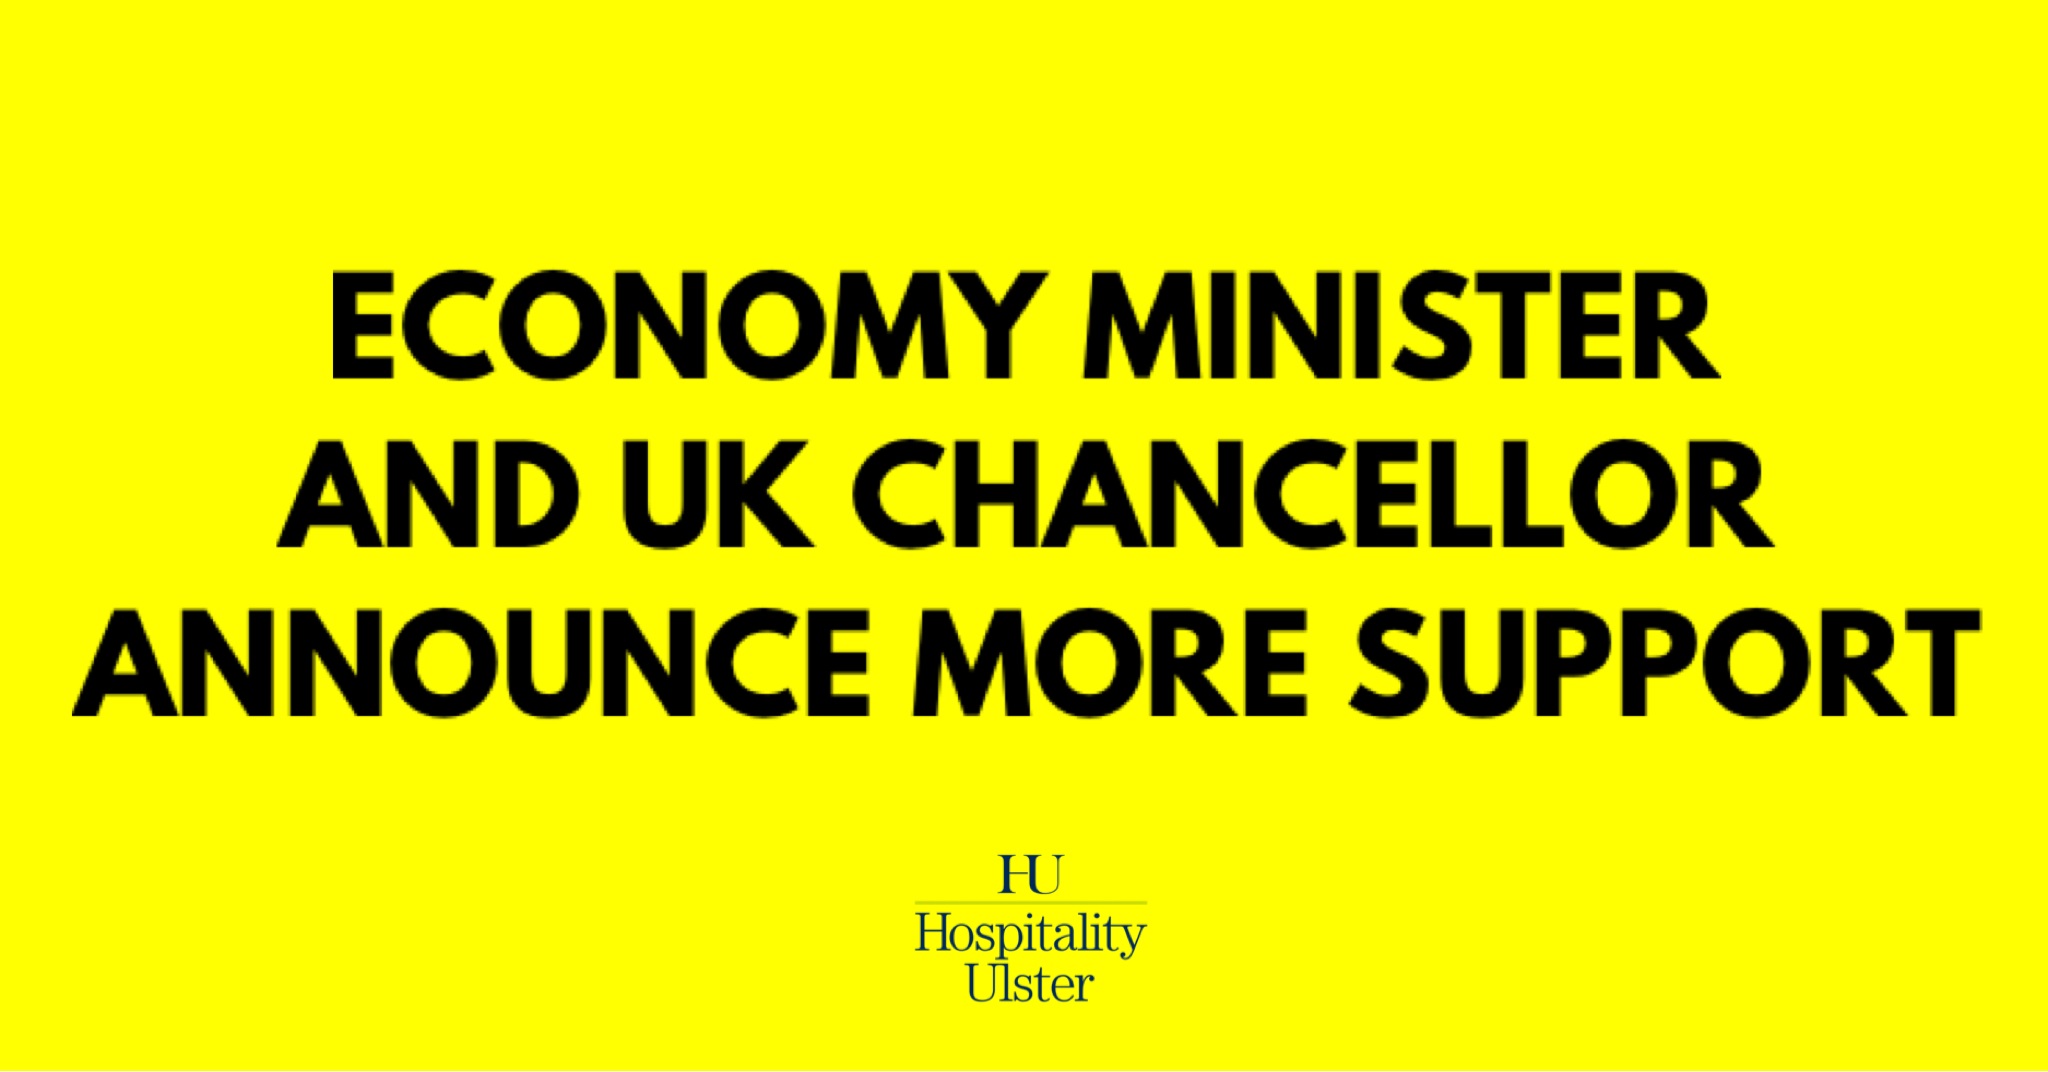 ECONOMY MINISTER AND UK CHANCELLOR ANNOUNCE MORE SUPPORT